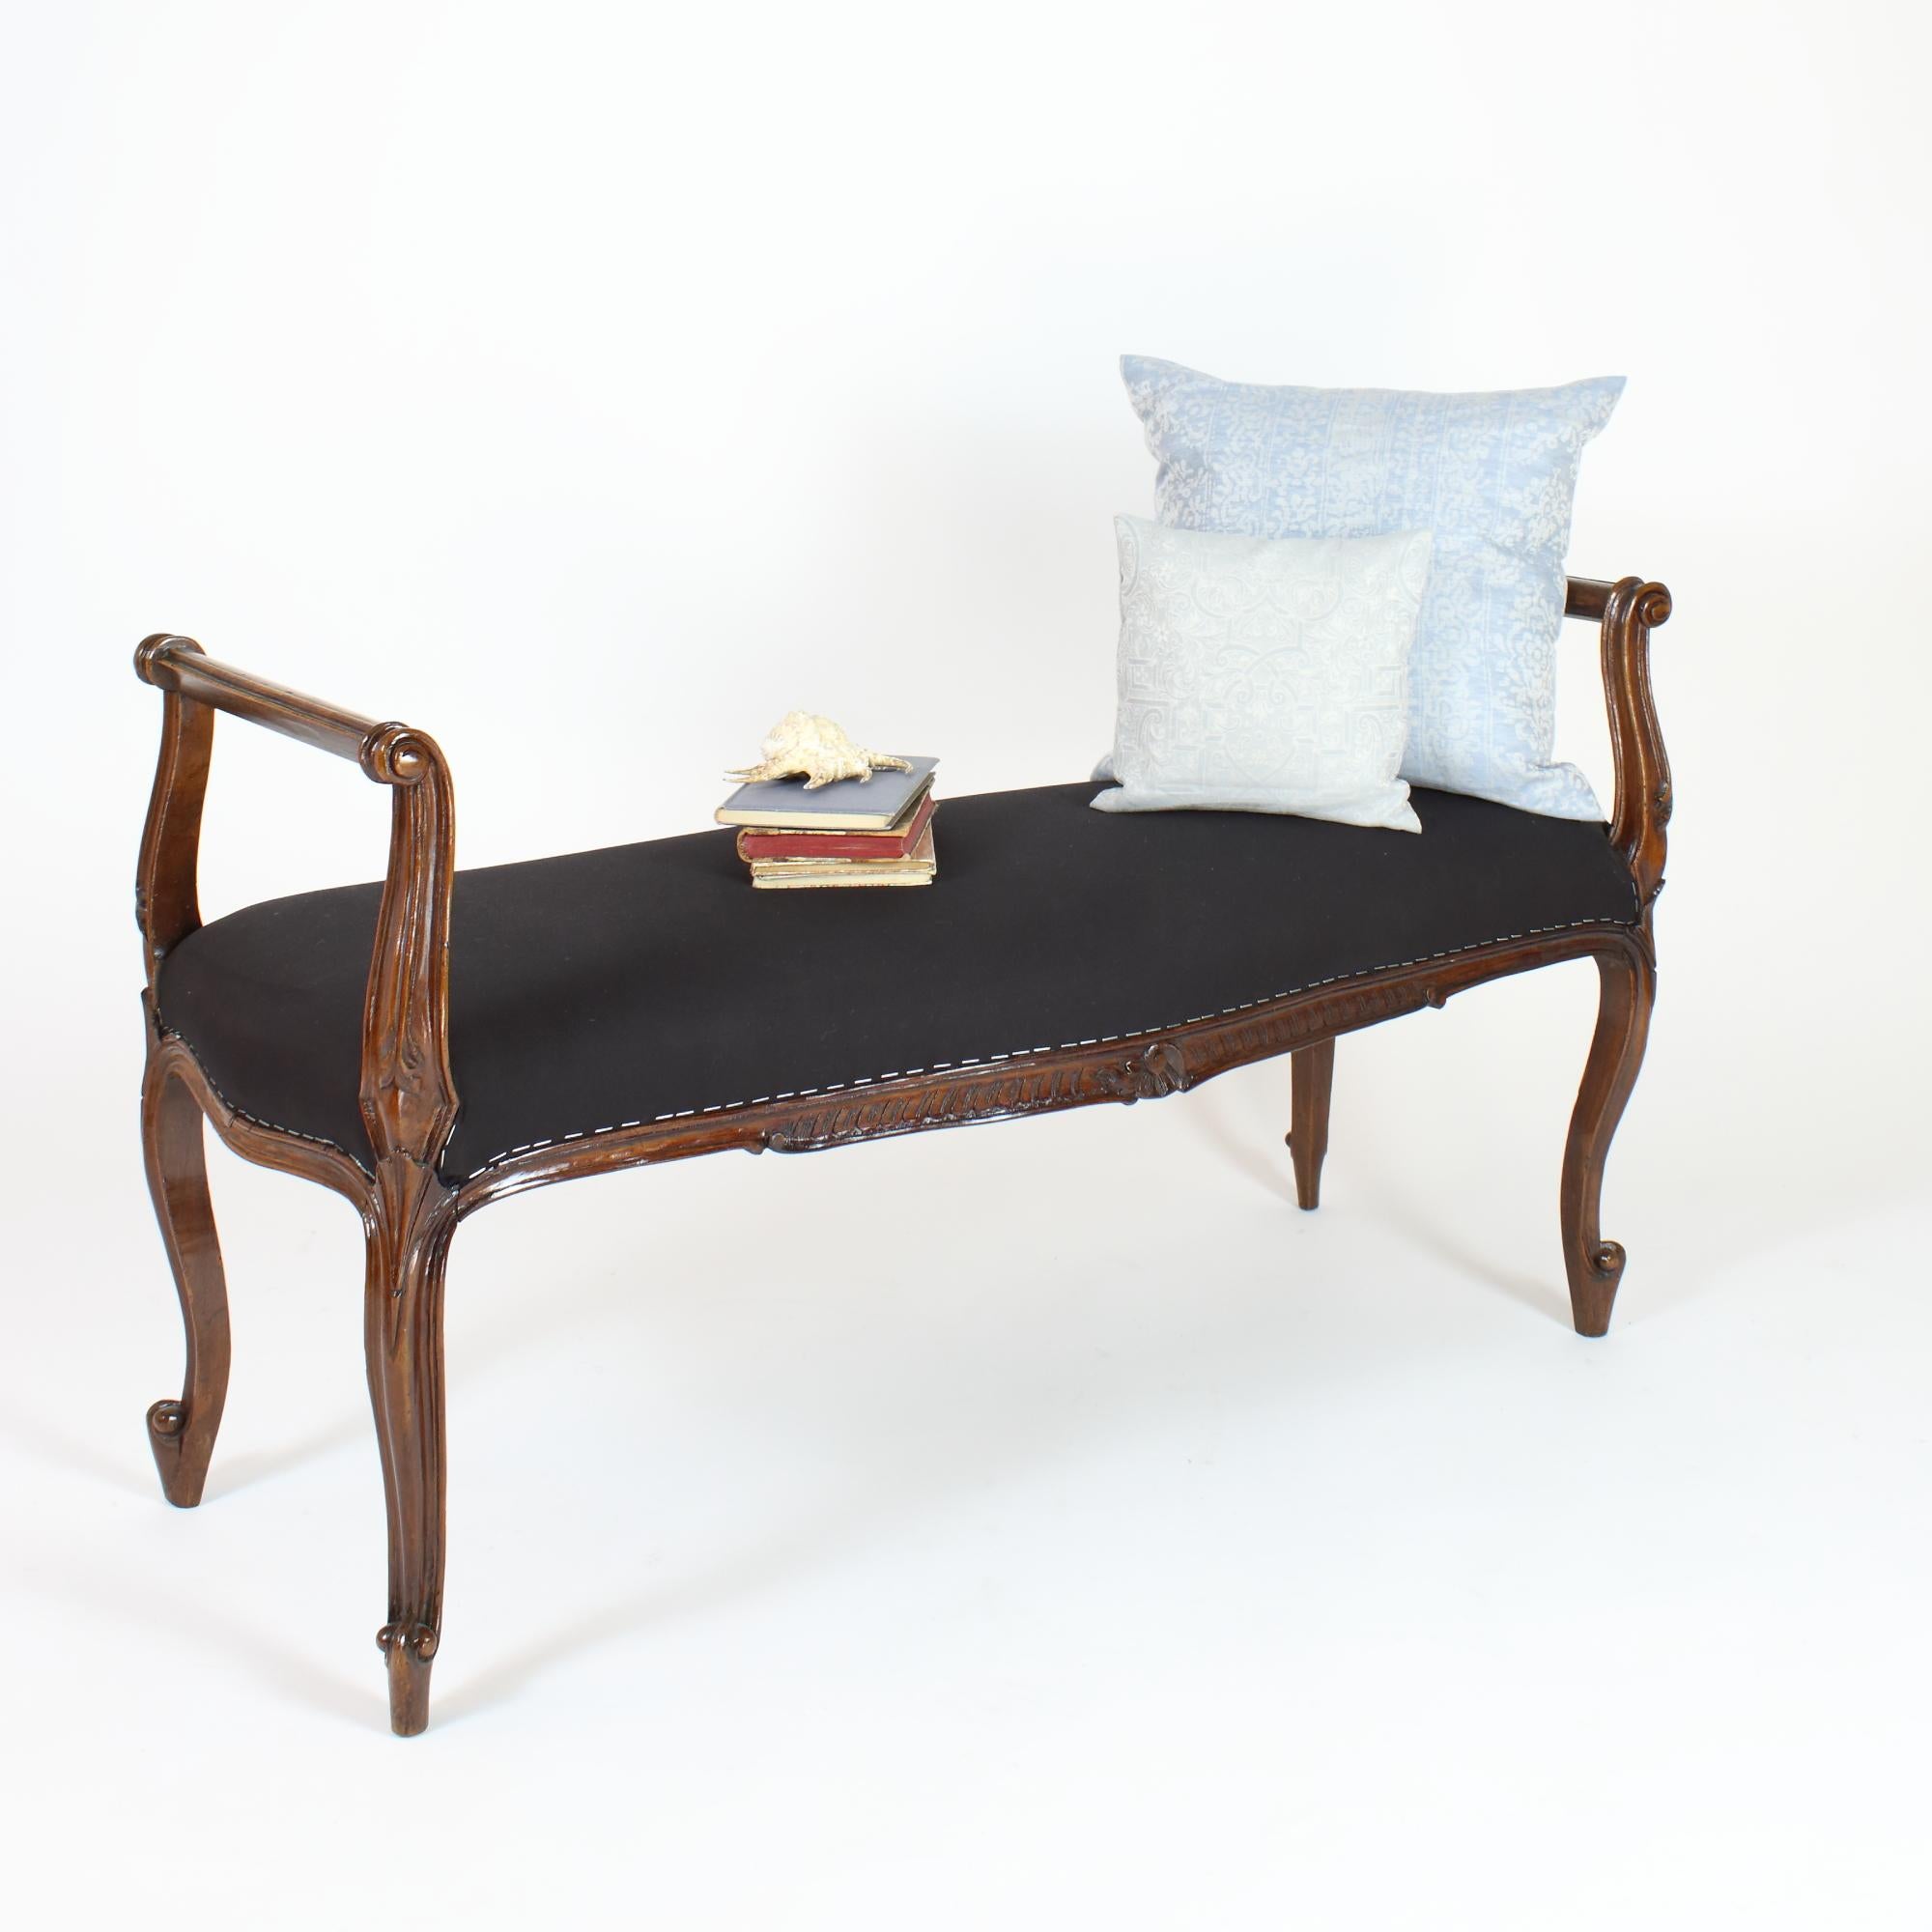 An elegant late 19th/early 20th century Louis XV banquette or window seat carved in solid walnut featuring scrolled arms and rails, the shaped padded seat above a serpentine frieze carved with rocaille and leaves, the whole supported on finely